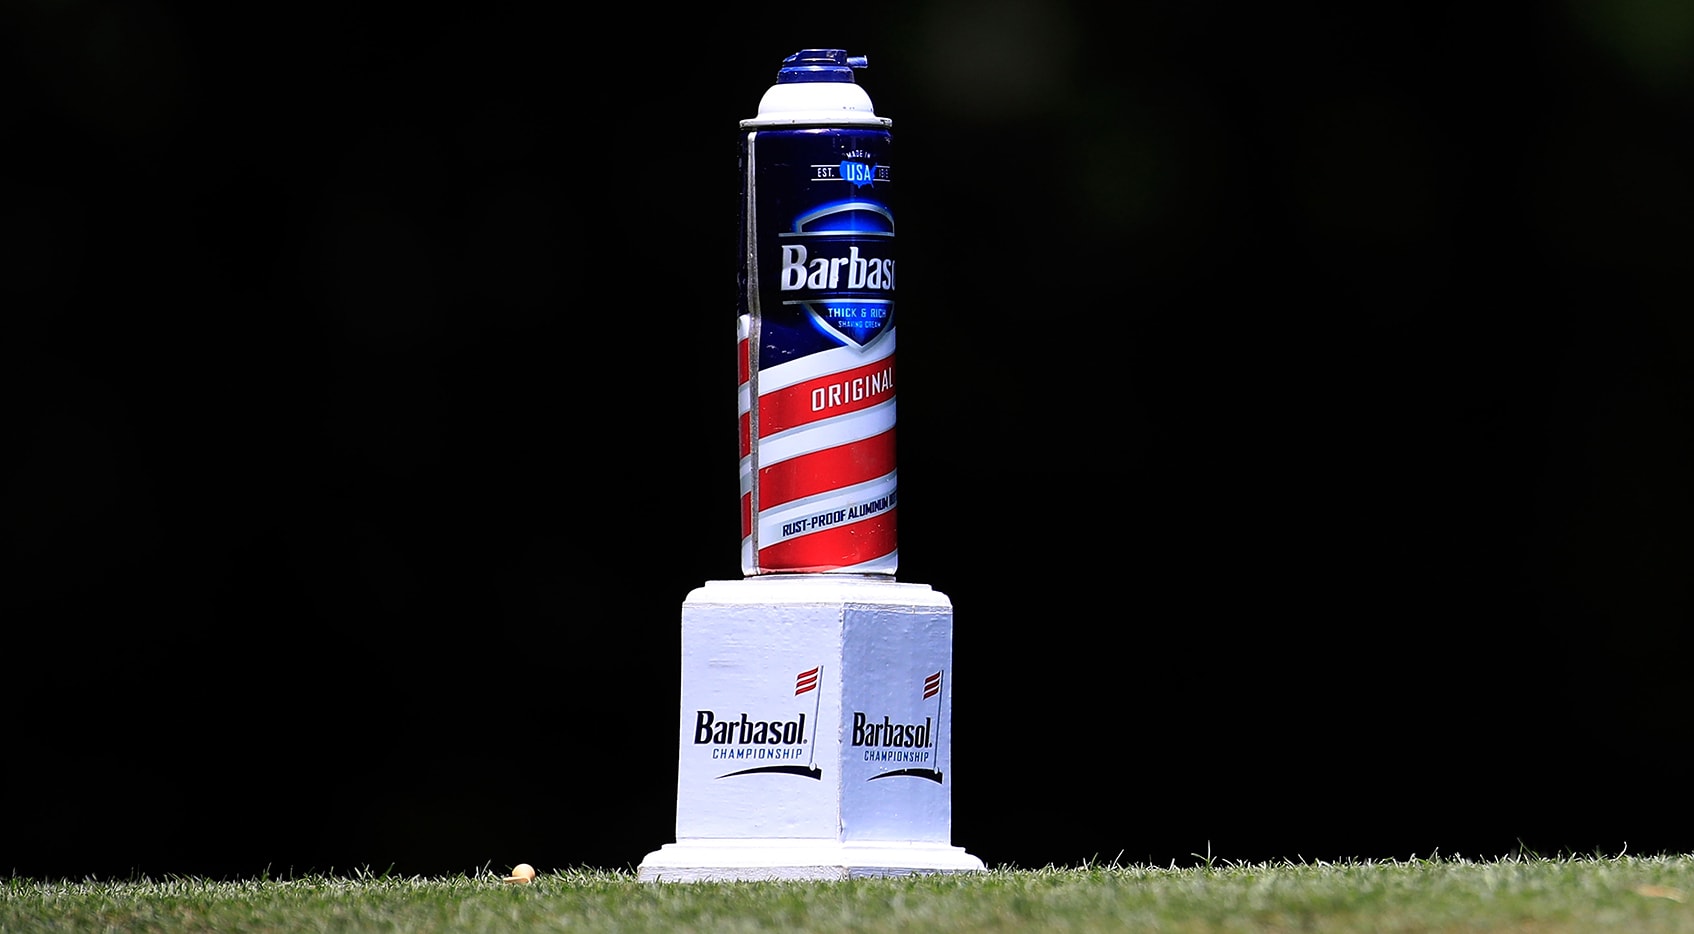 How to watch Barbasol Championship, Round 1 TV times, live scoring, tee times